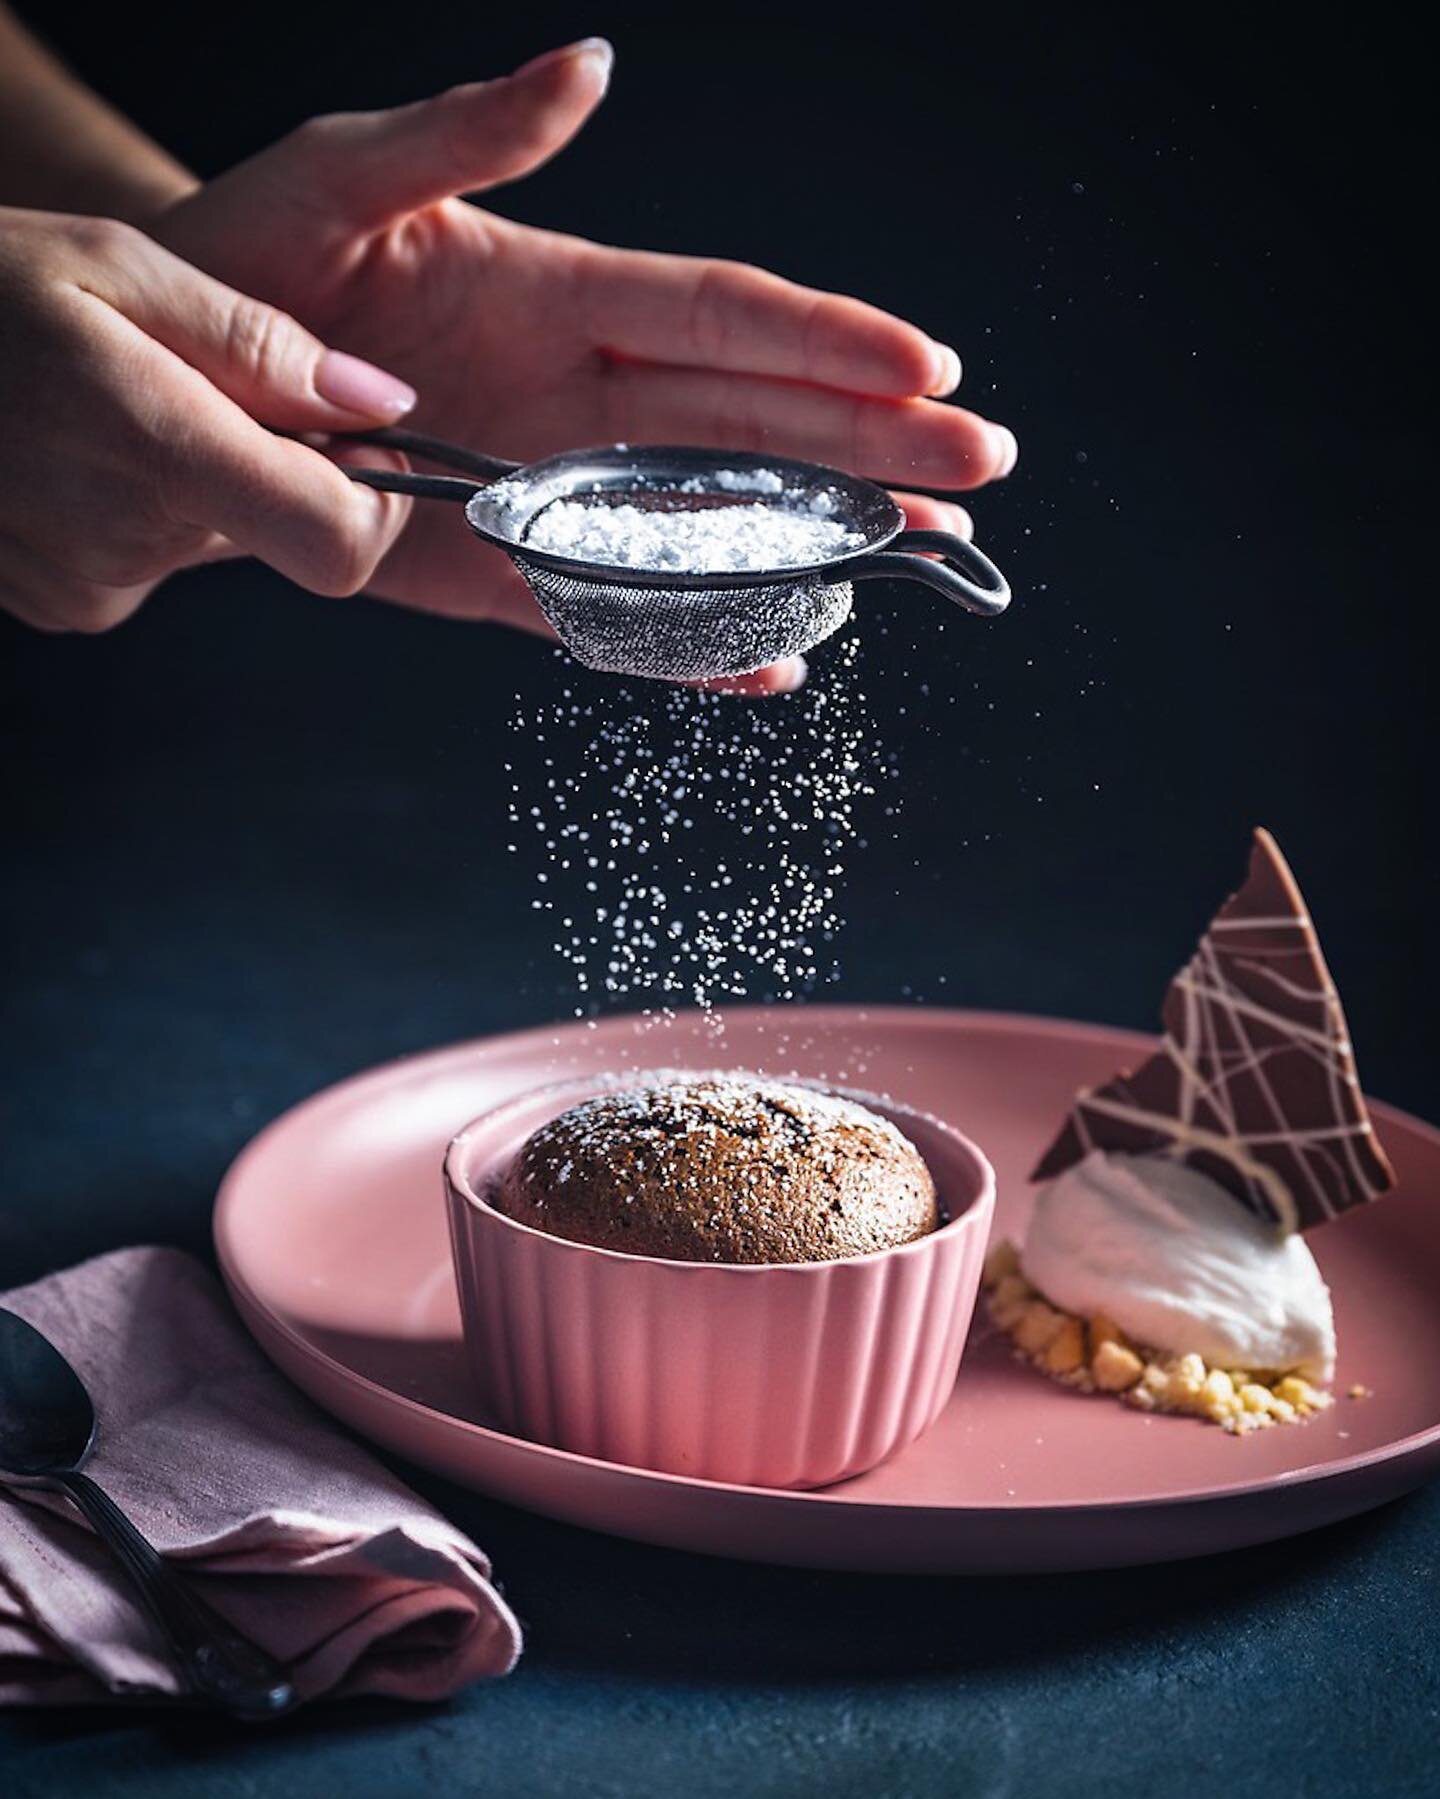 One of my favorite shots from the Crazy Sweet Creations cookbook by @howtocookthat 👩&zwj;🍳 
.
We had two versions of this dessert. One in a black ramekin and one with pink. We shot both but the sprinkling action on the black was better but the pink